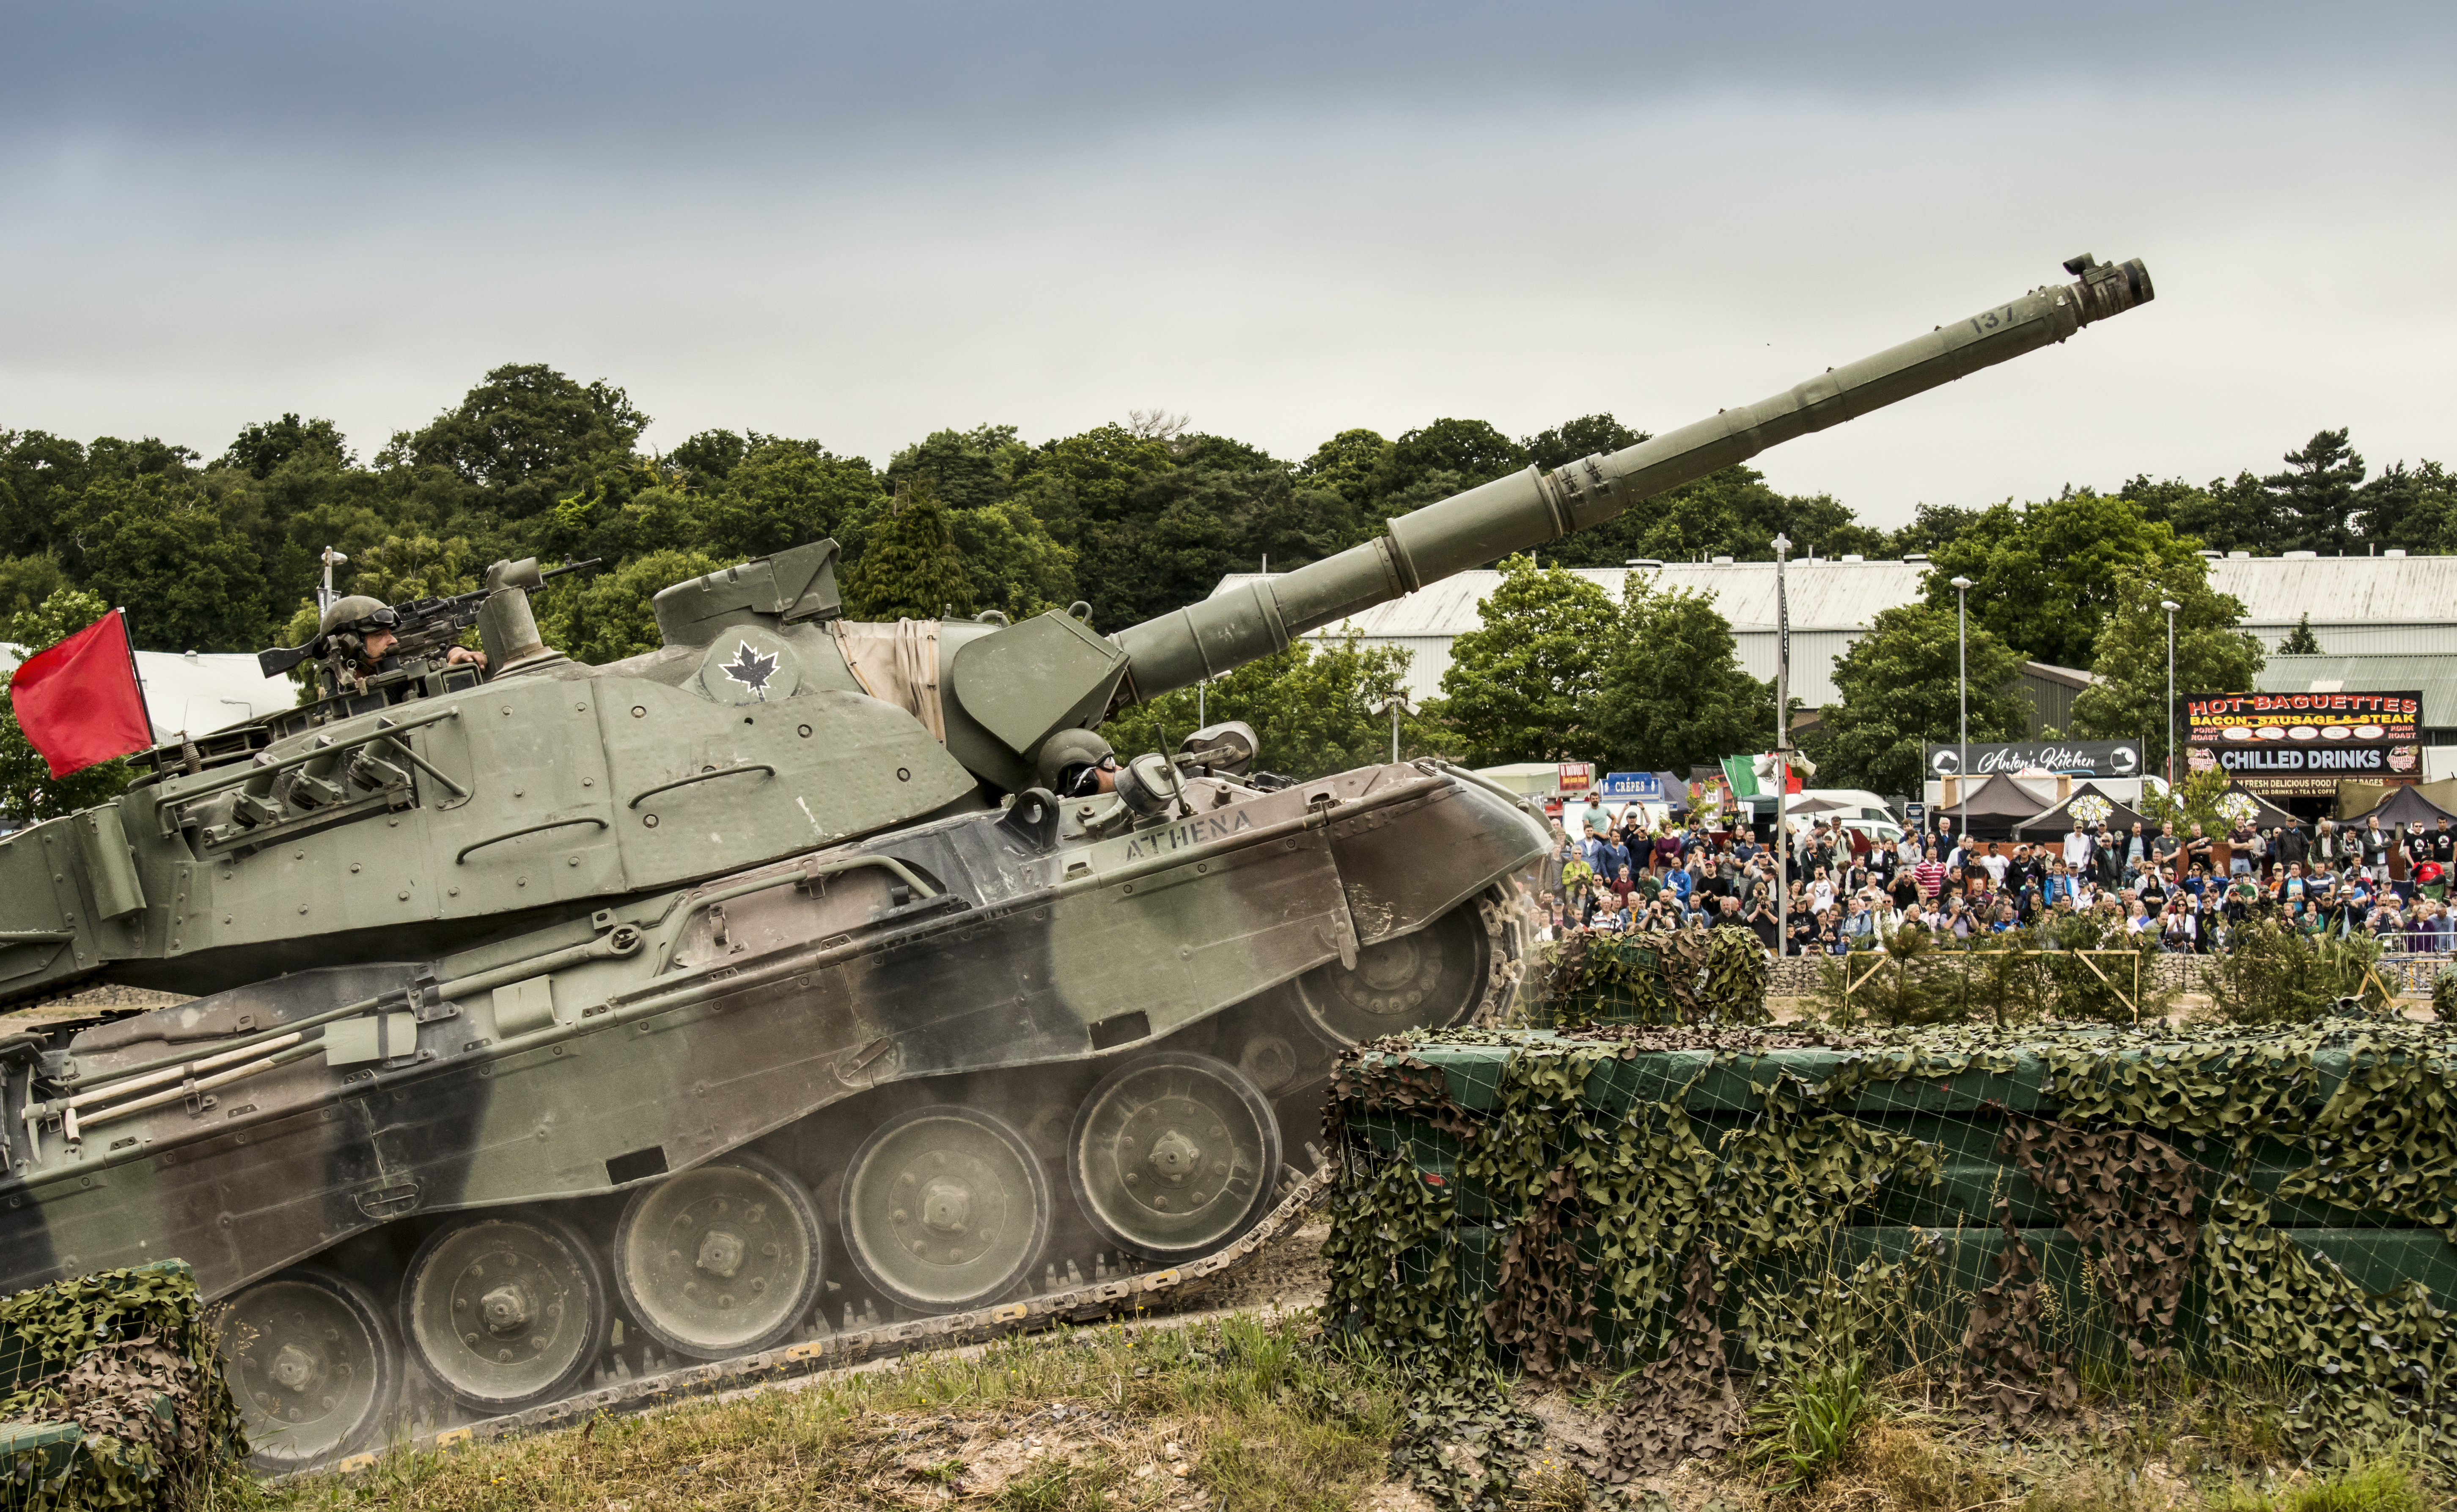 In an outdoor setting, an army tank is driving across the view. People are watching and there are festival stalls in the background.